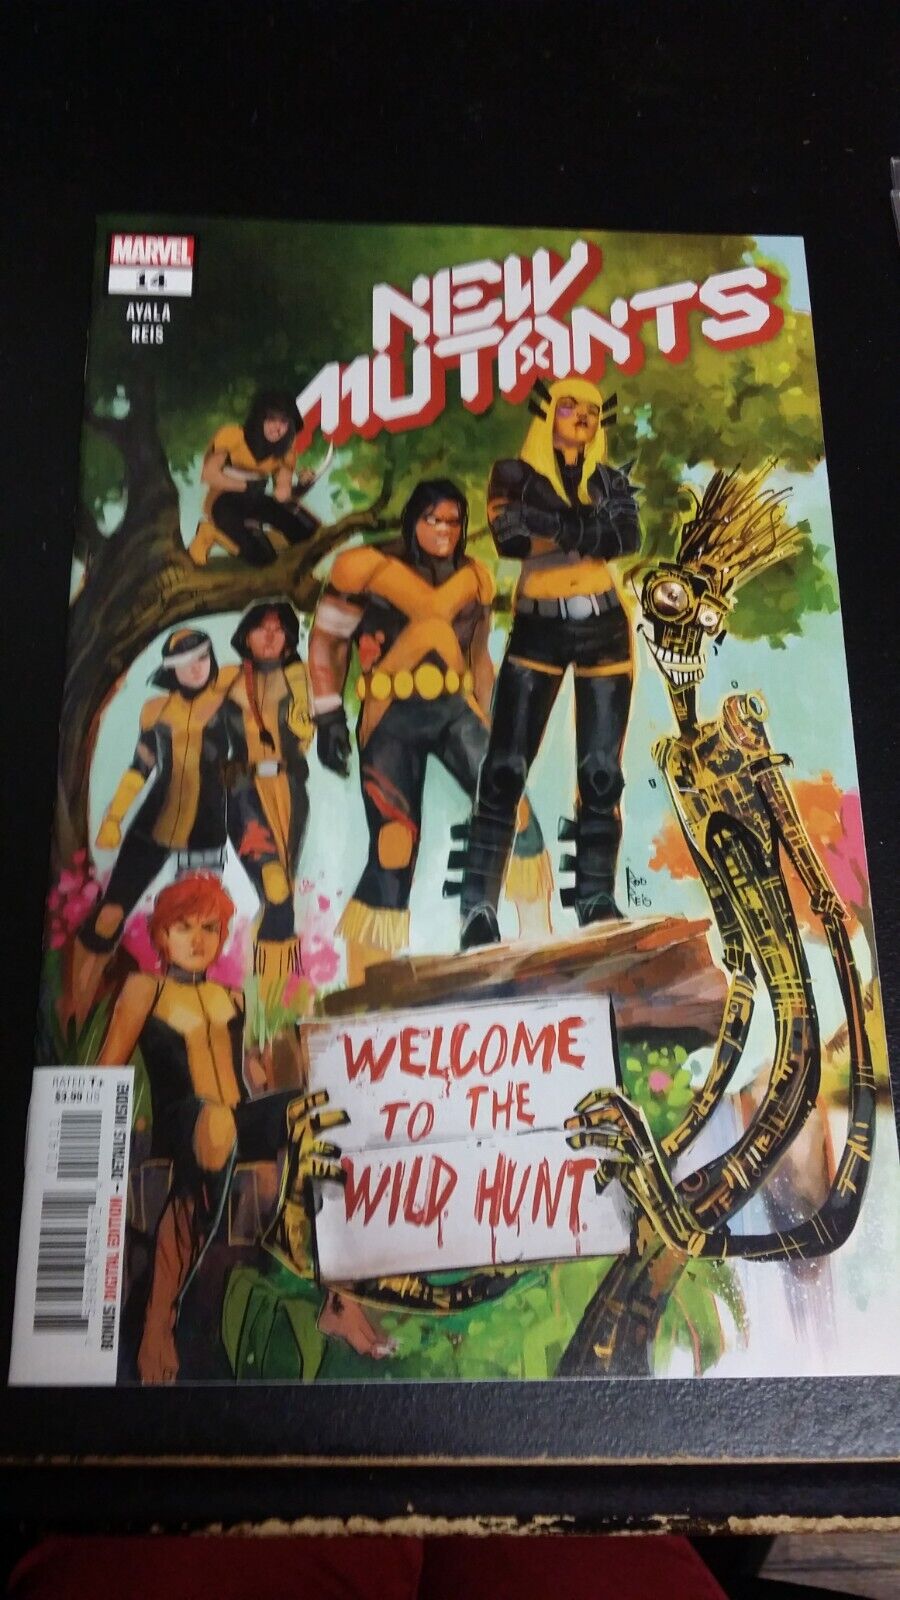 MARVEL COMICS THE NEW MUTANTS VOL 1, 3, & 4. MULTIPLE ISSUES/COVERS AVAILABLE